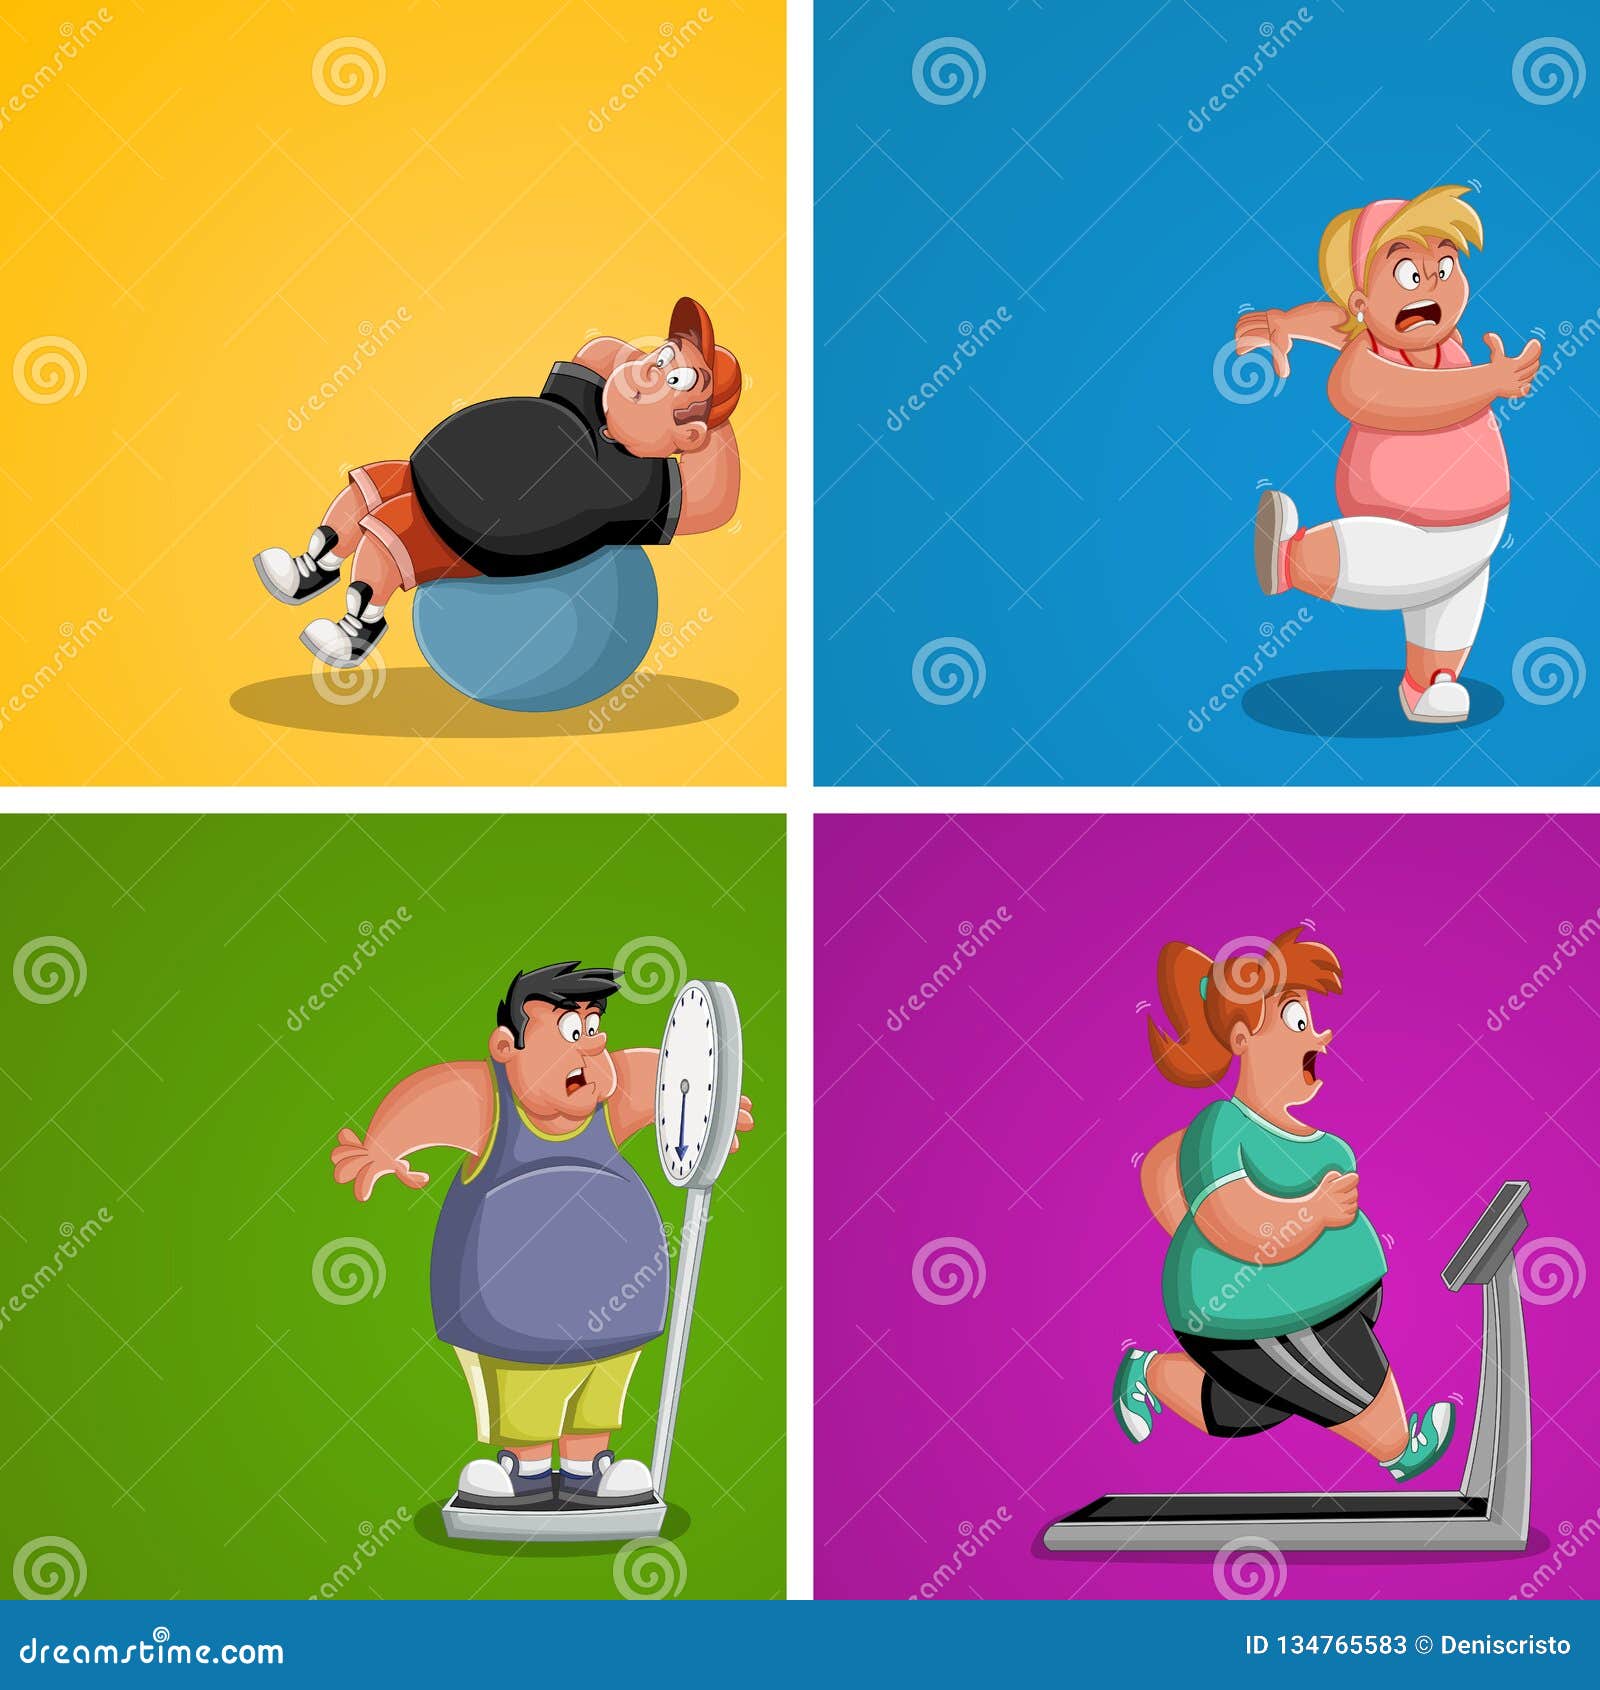 people working out clip art